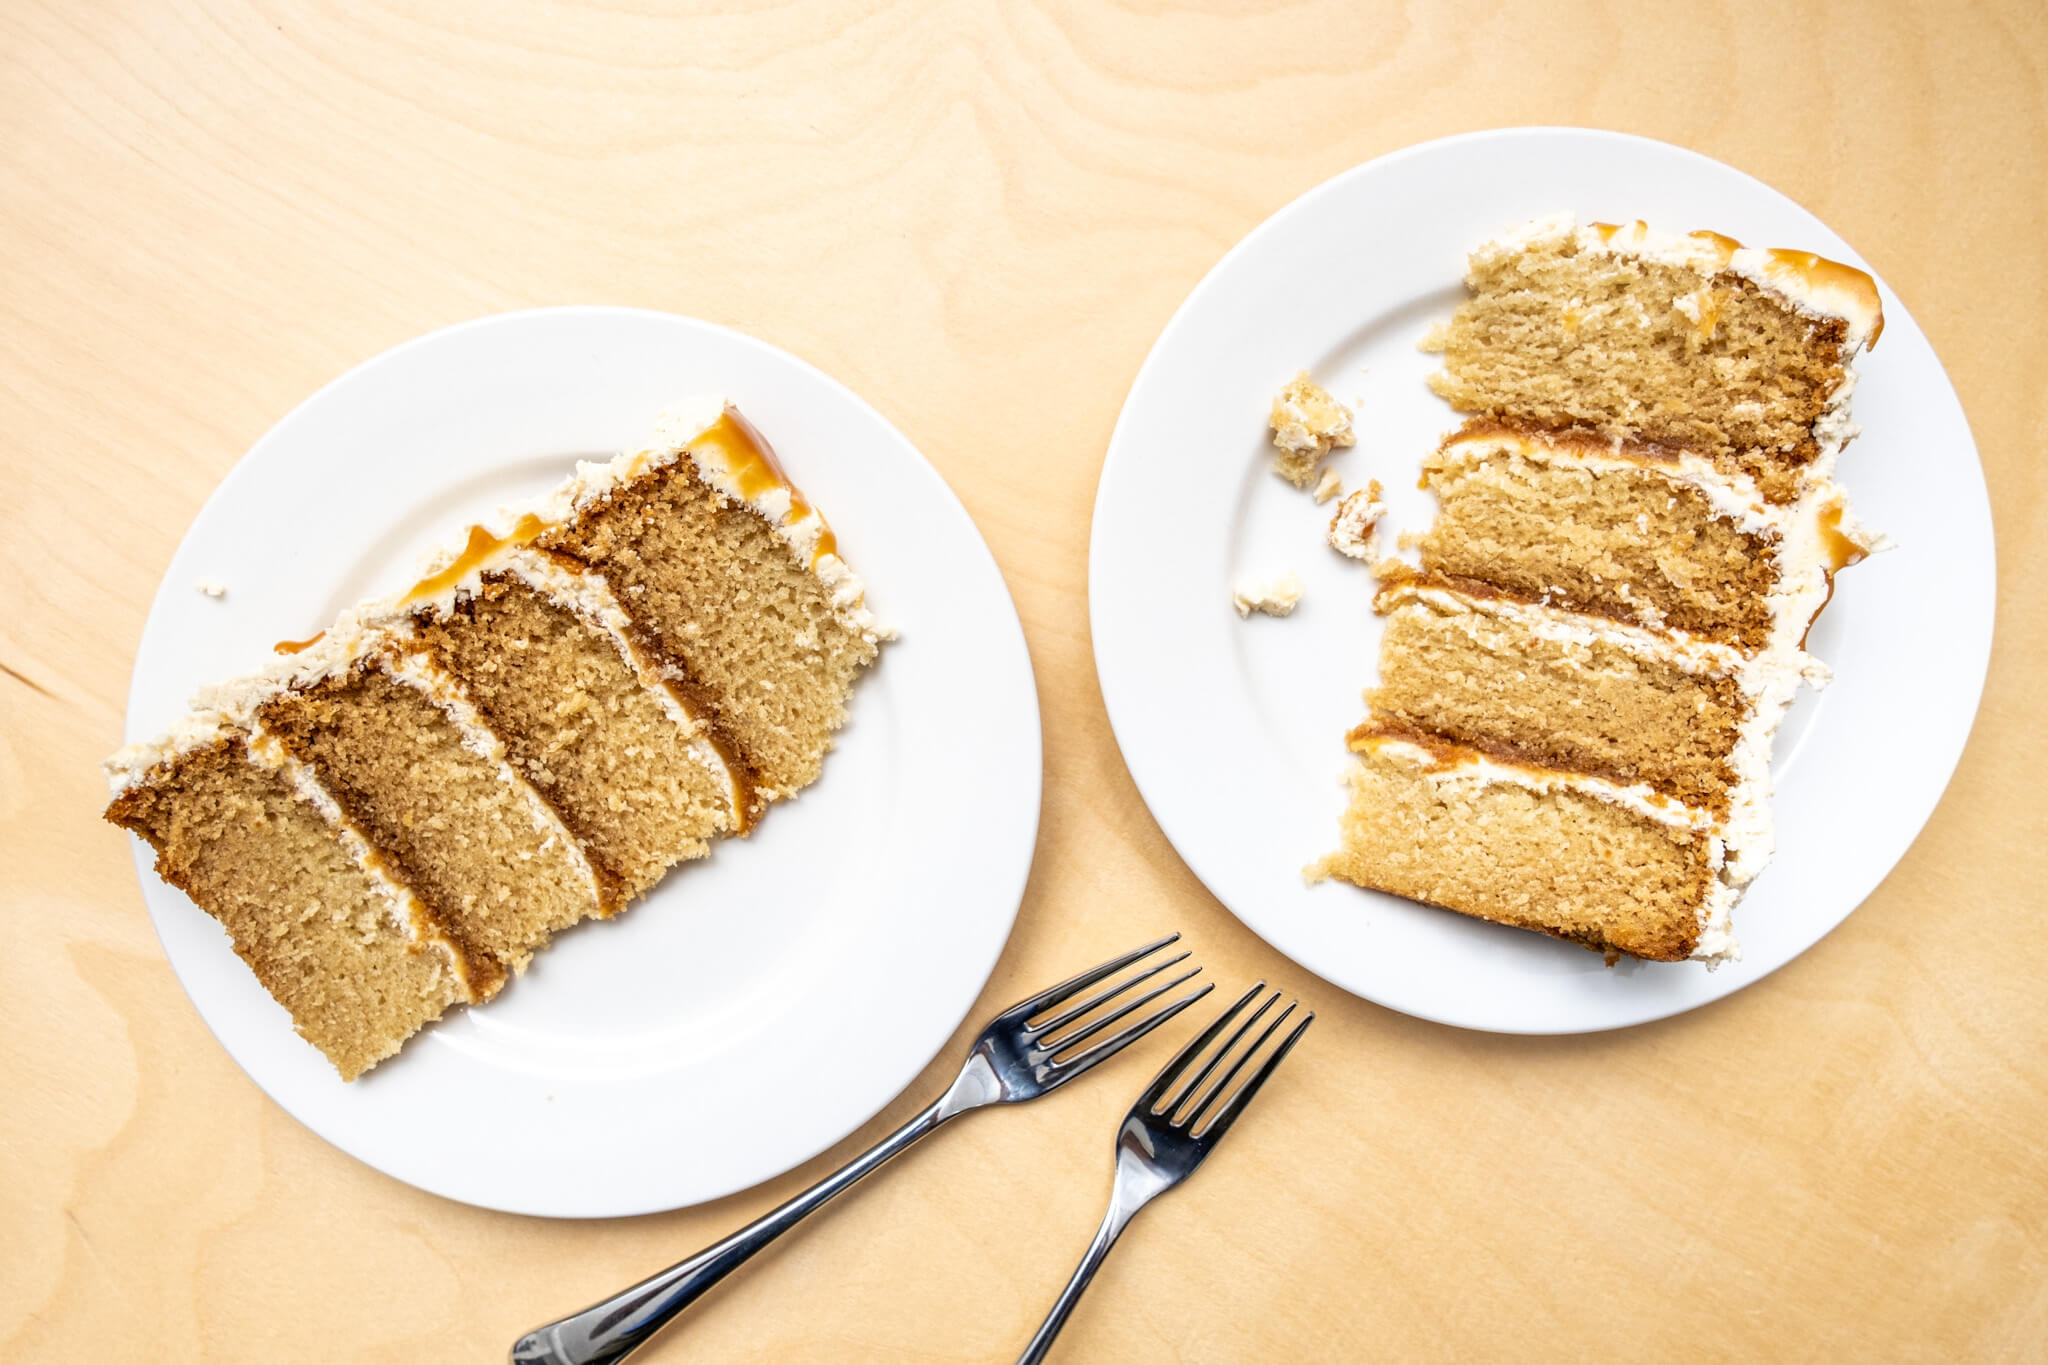 Two plates with slices of vegan caramel cake on a wood table